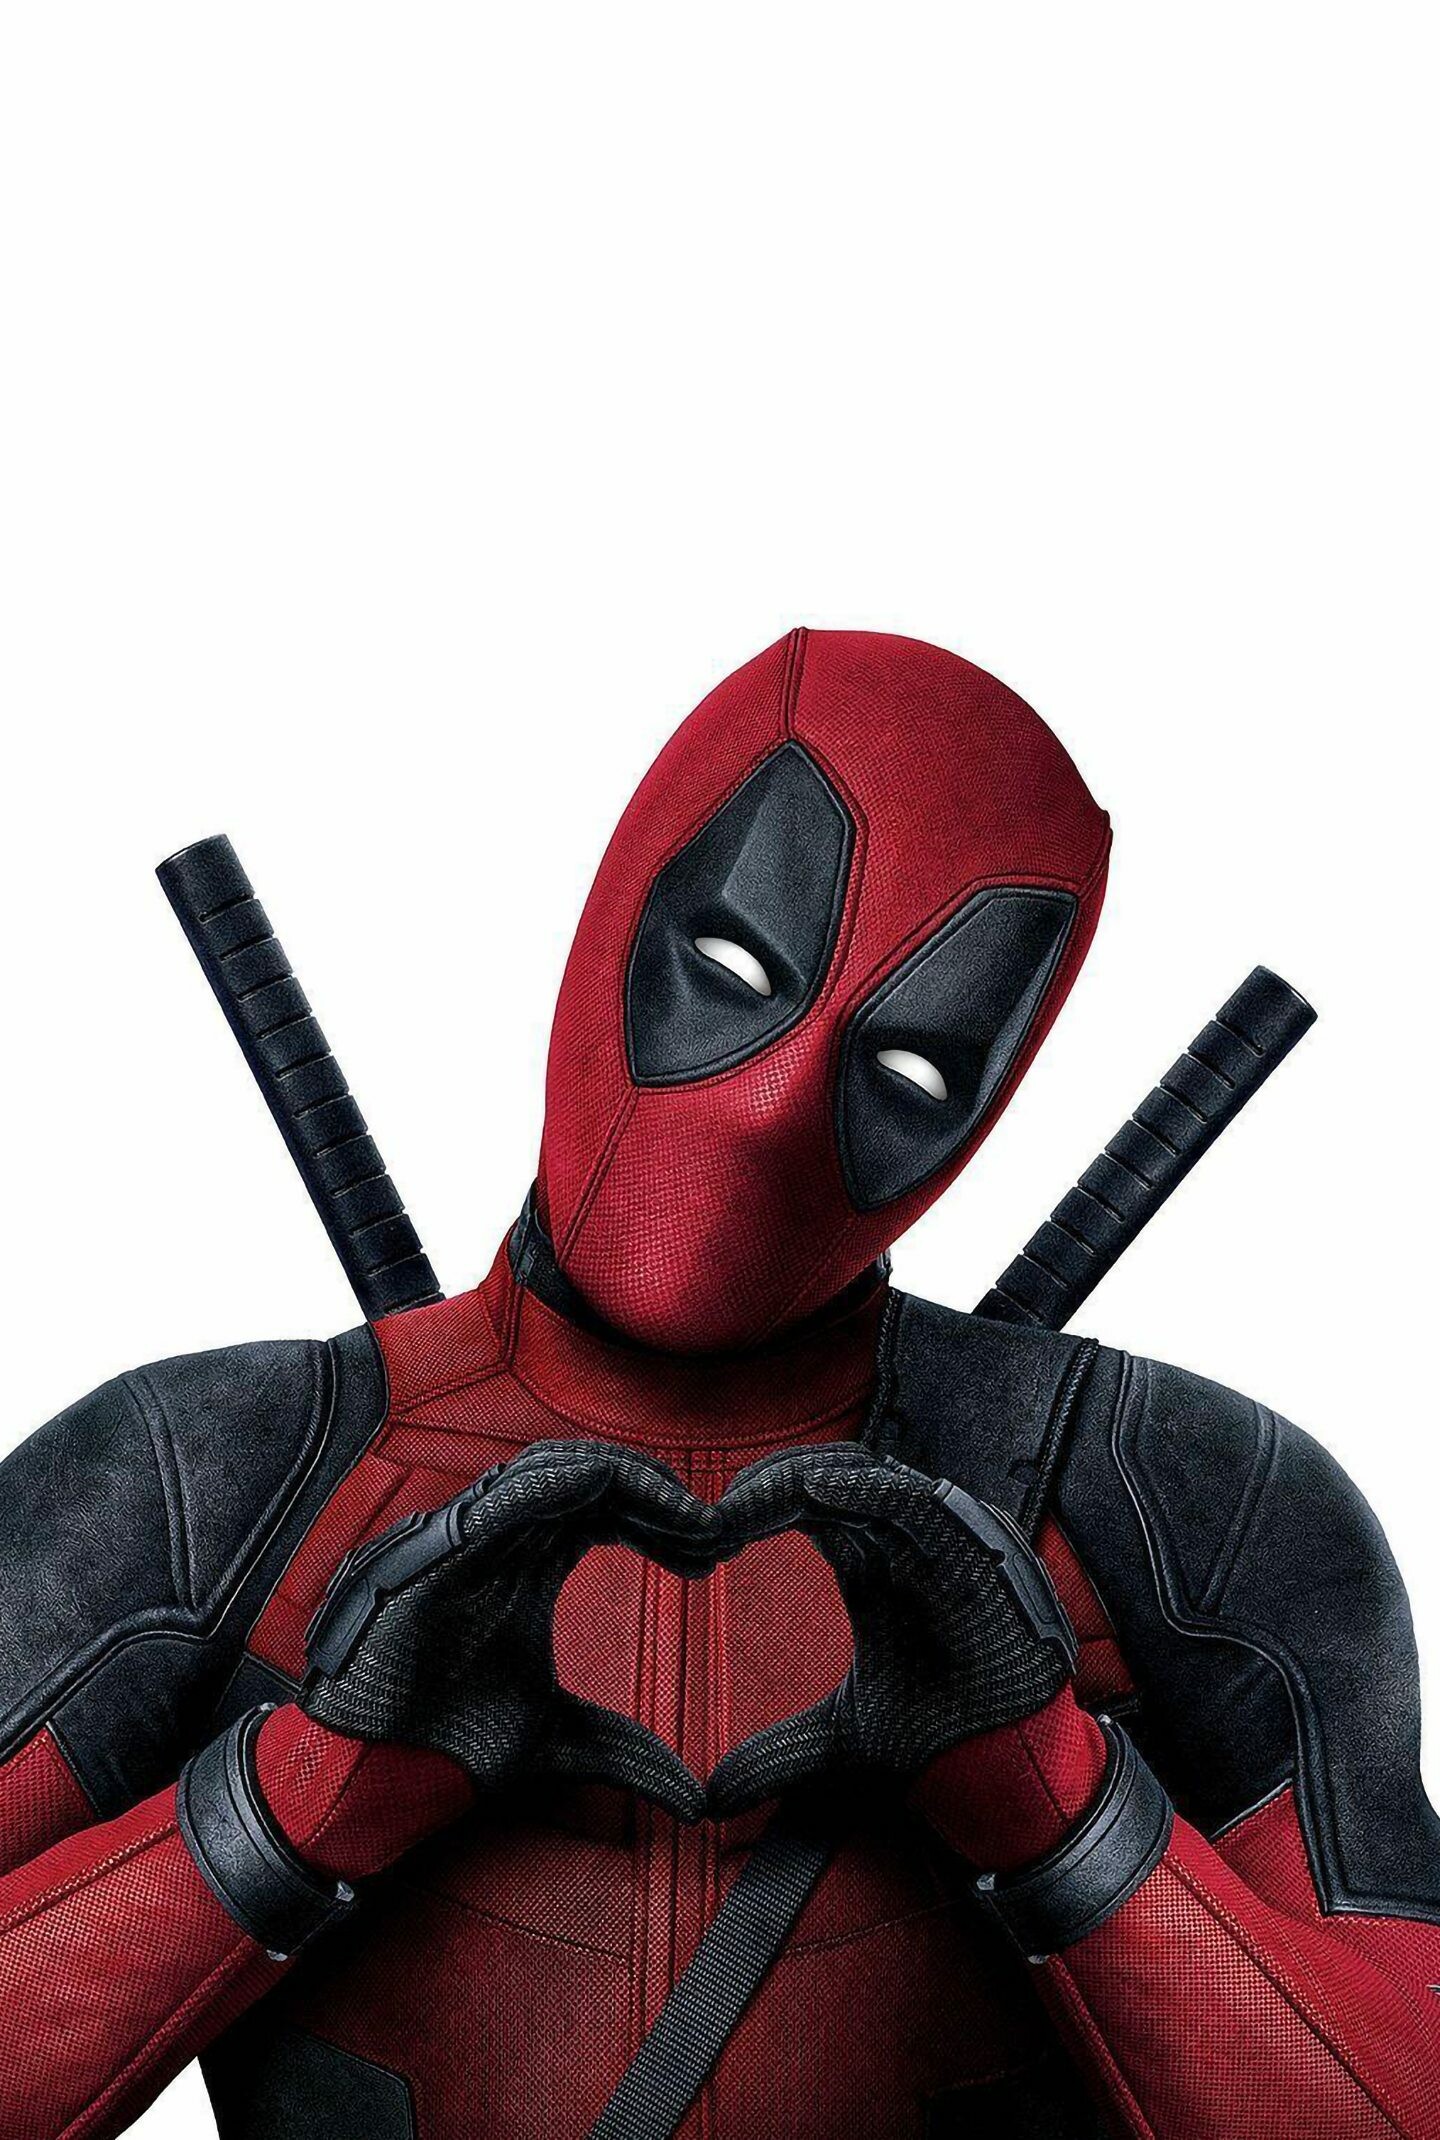 Deadpool: The film earned over $782 million against a $58 million budget. 1440x2140 HD Background.